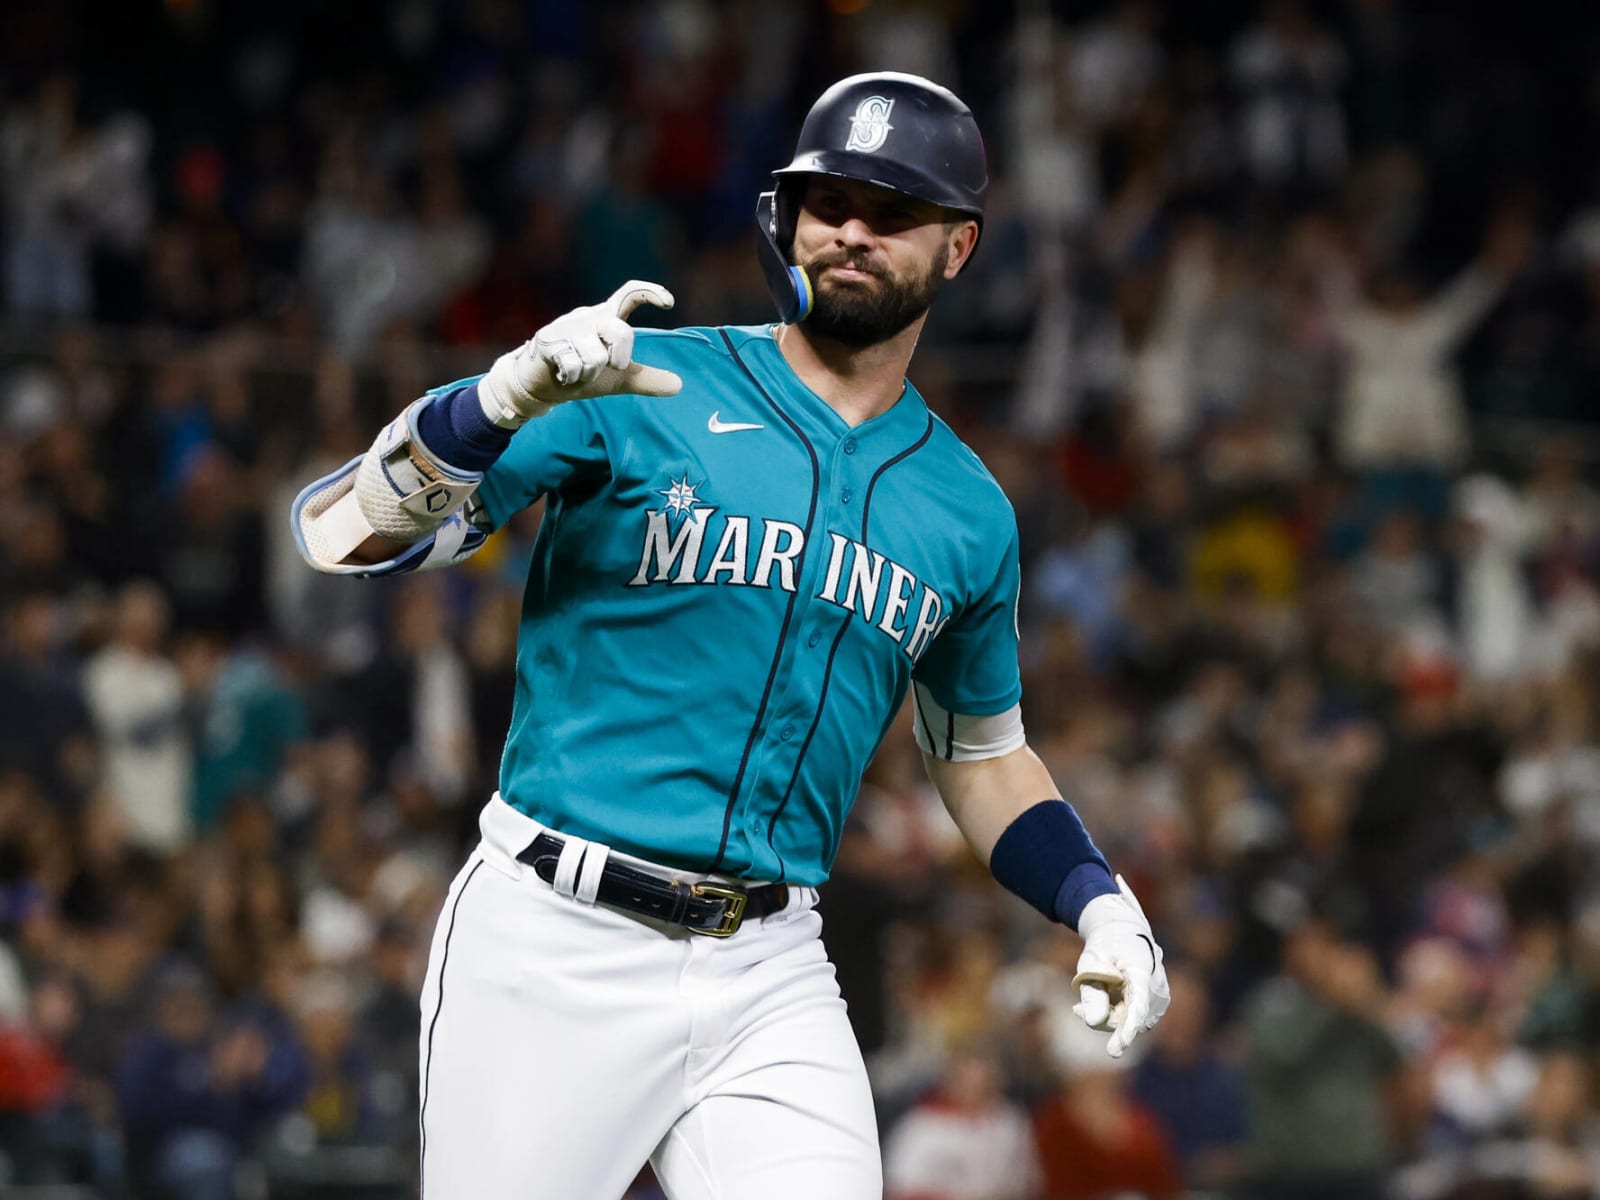 Mariners to acquire Jesse Winker, Eugenio Suárez from Reds, per